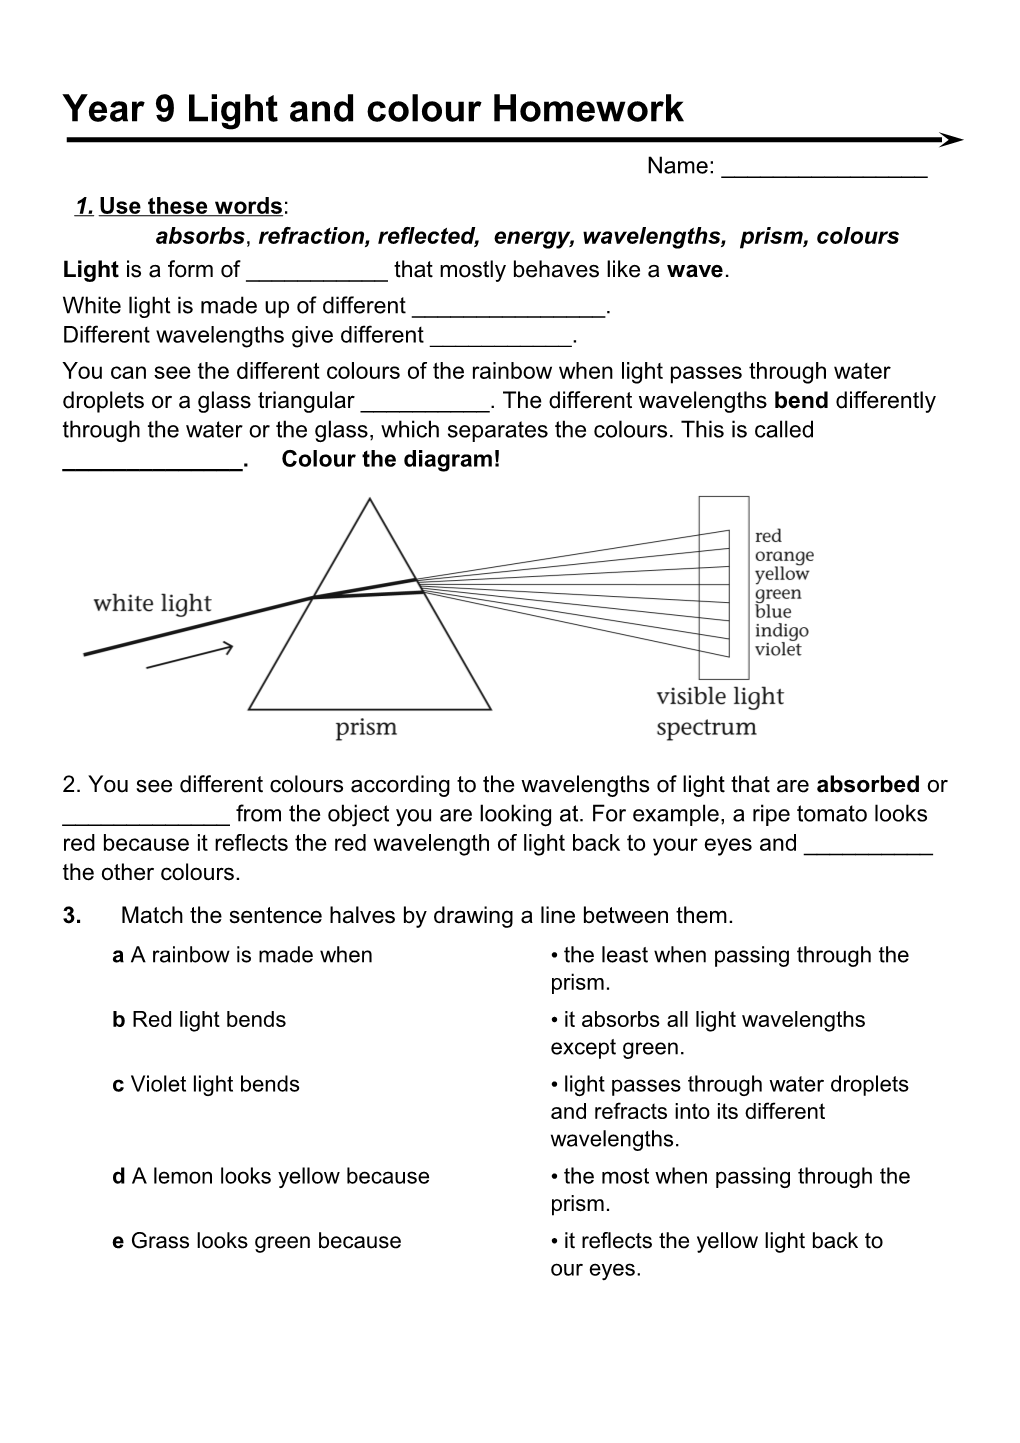 1. Use These Words : Absorbs, Refraction, Reflected, Energy, Wavelengths, Prism, Colours